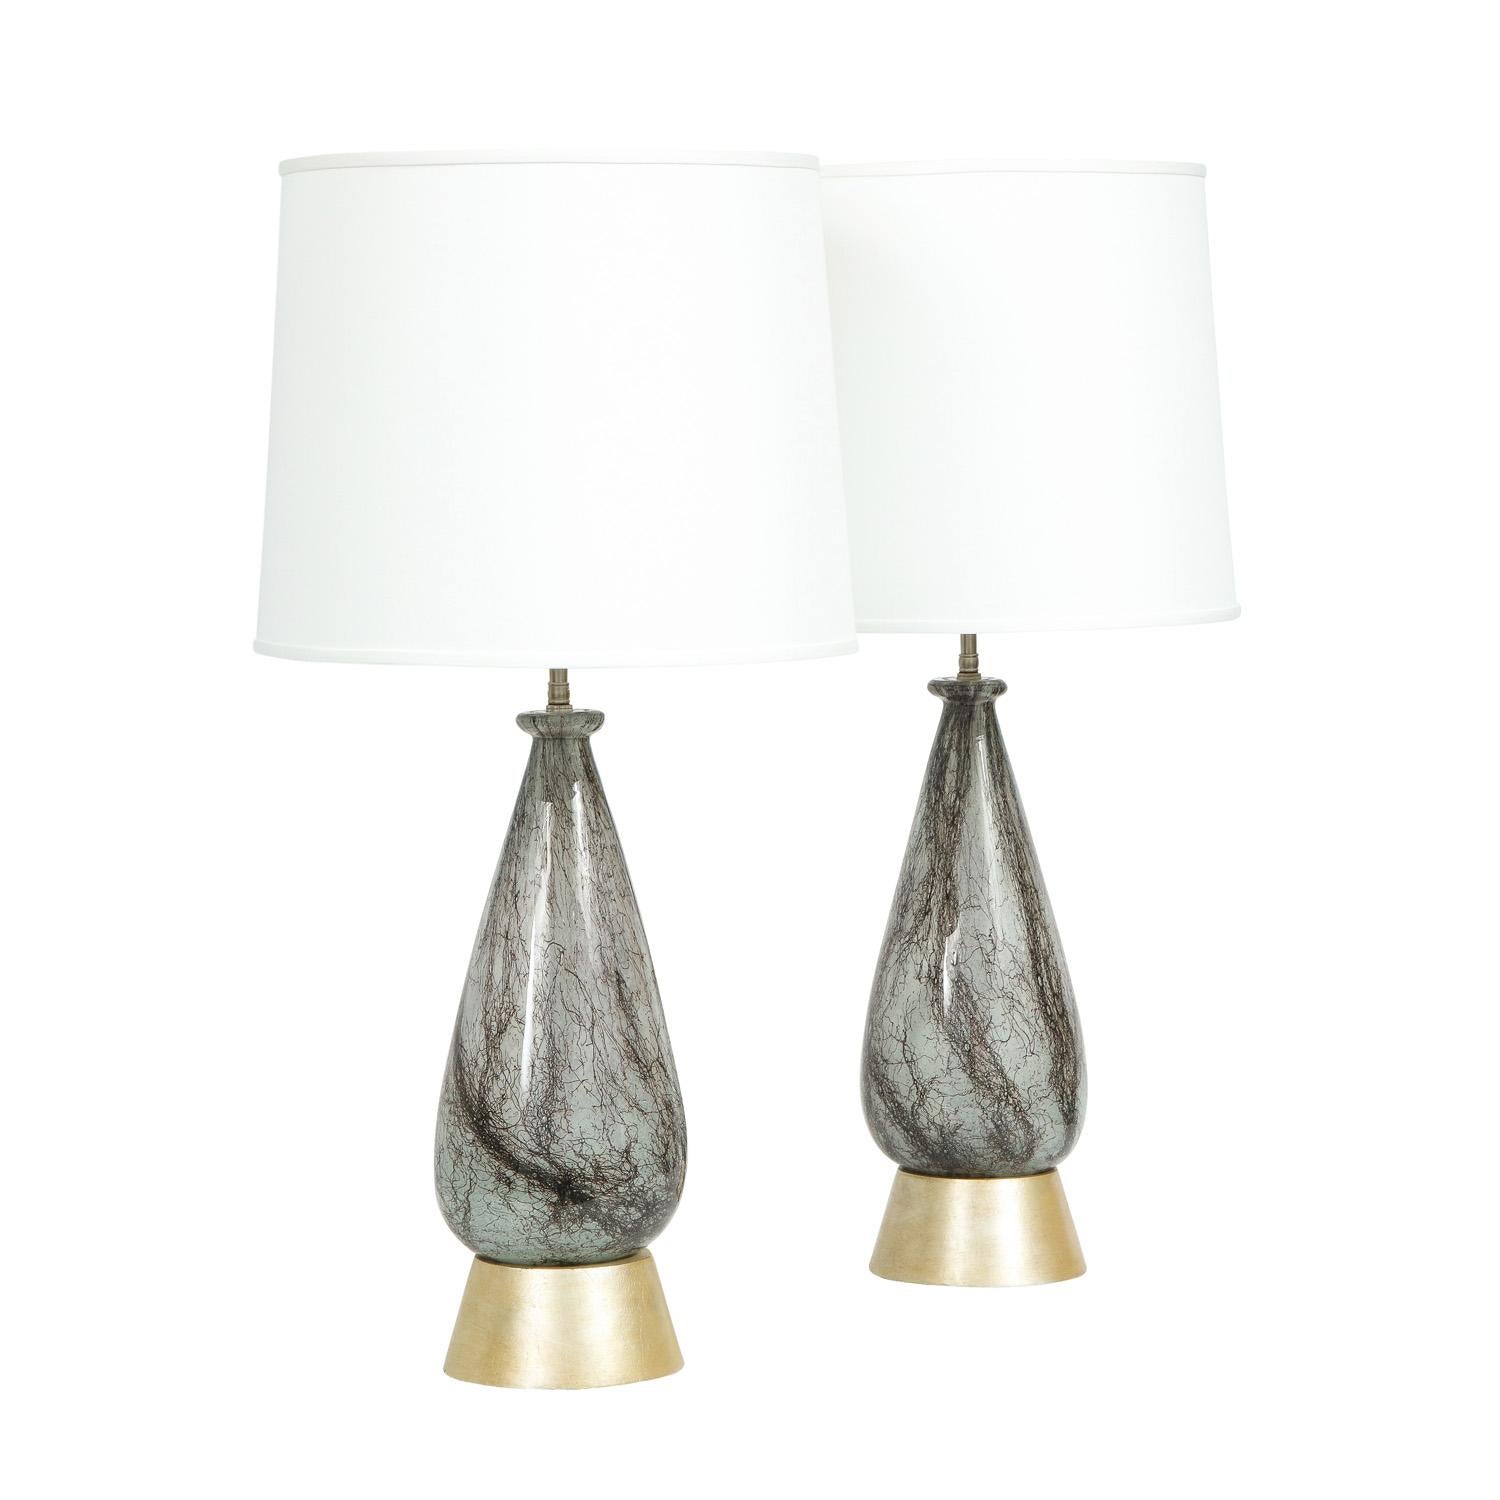 Modern Pair of Hand Blown Glass Table Lamps Attributed to Ercole Barovier, 1930s